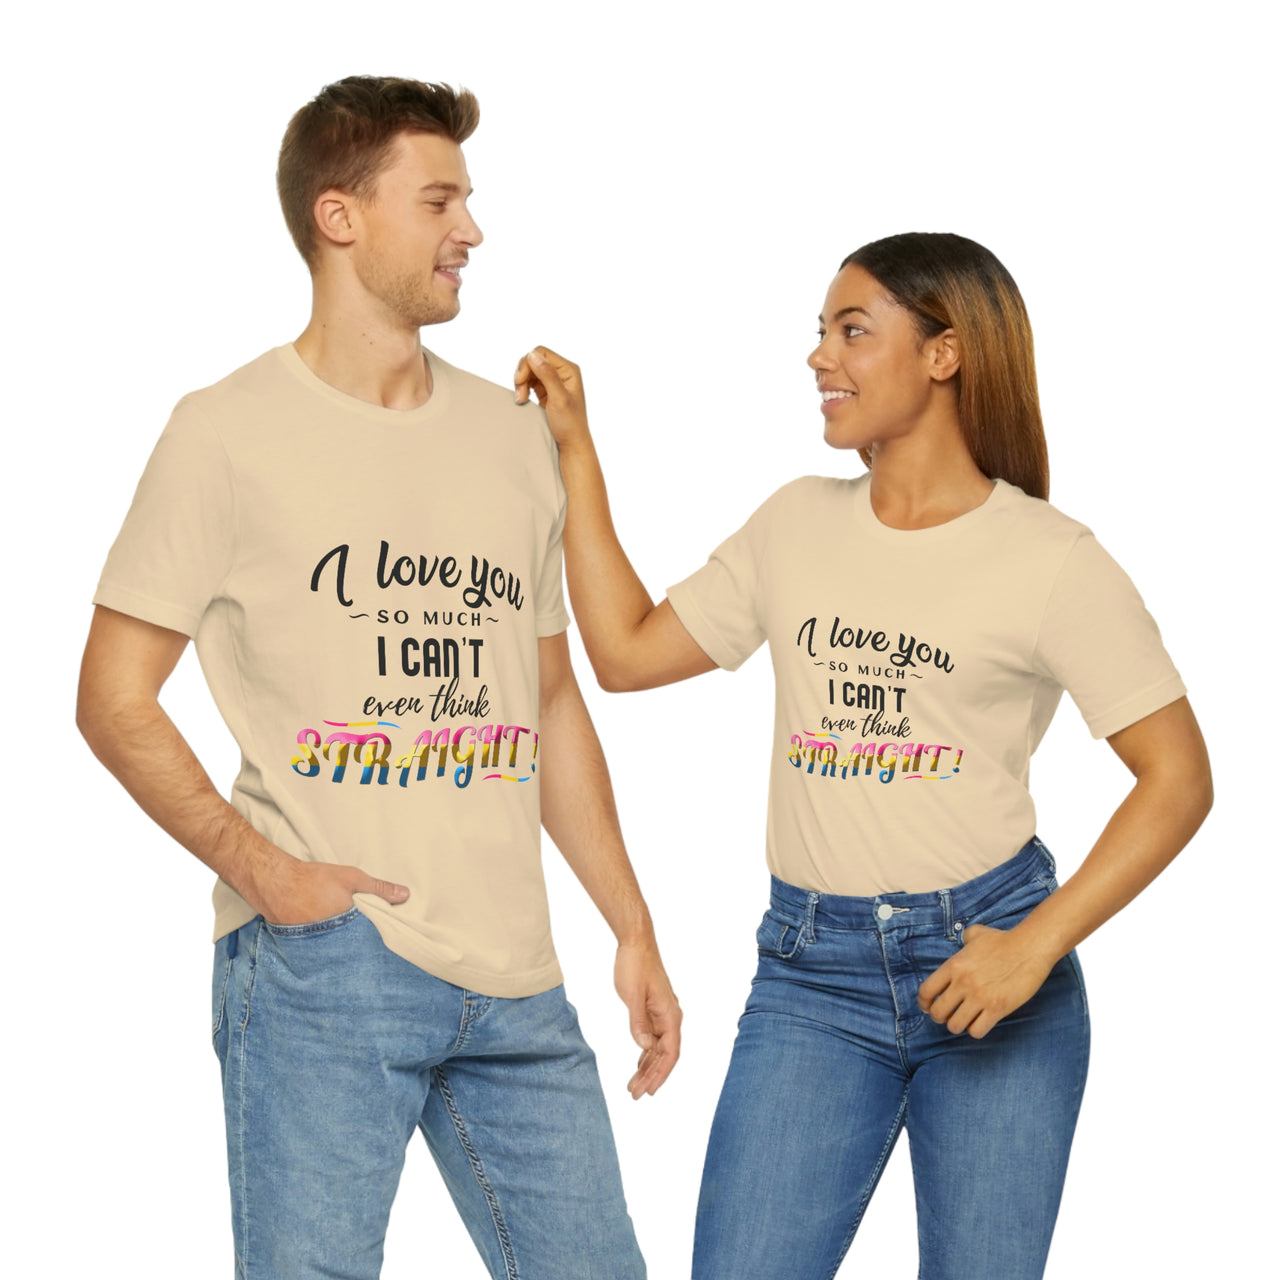 Pansexual Flag LGBTQ Affirmation T-shirt  Unisex Size - I Can't Even Think Straight Printify